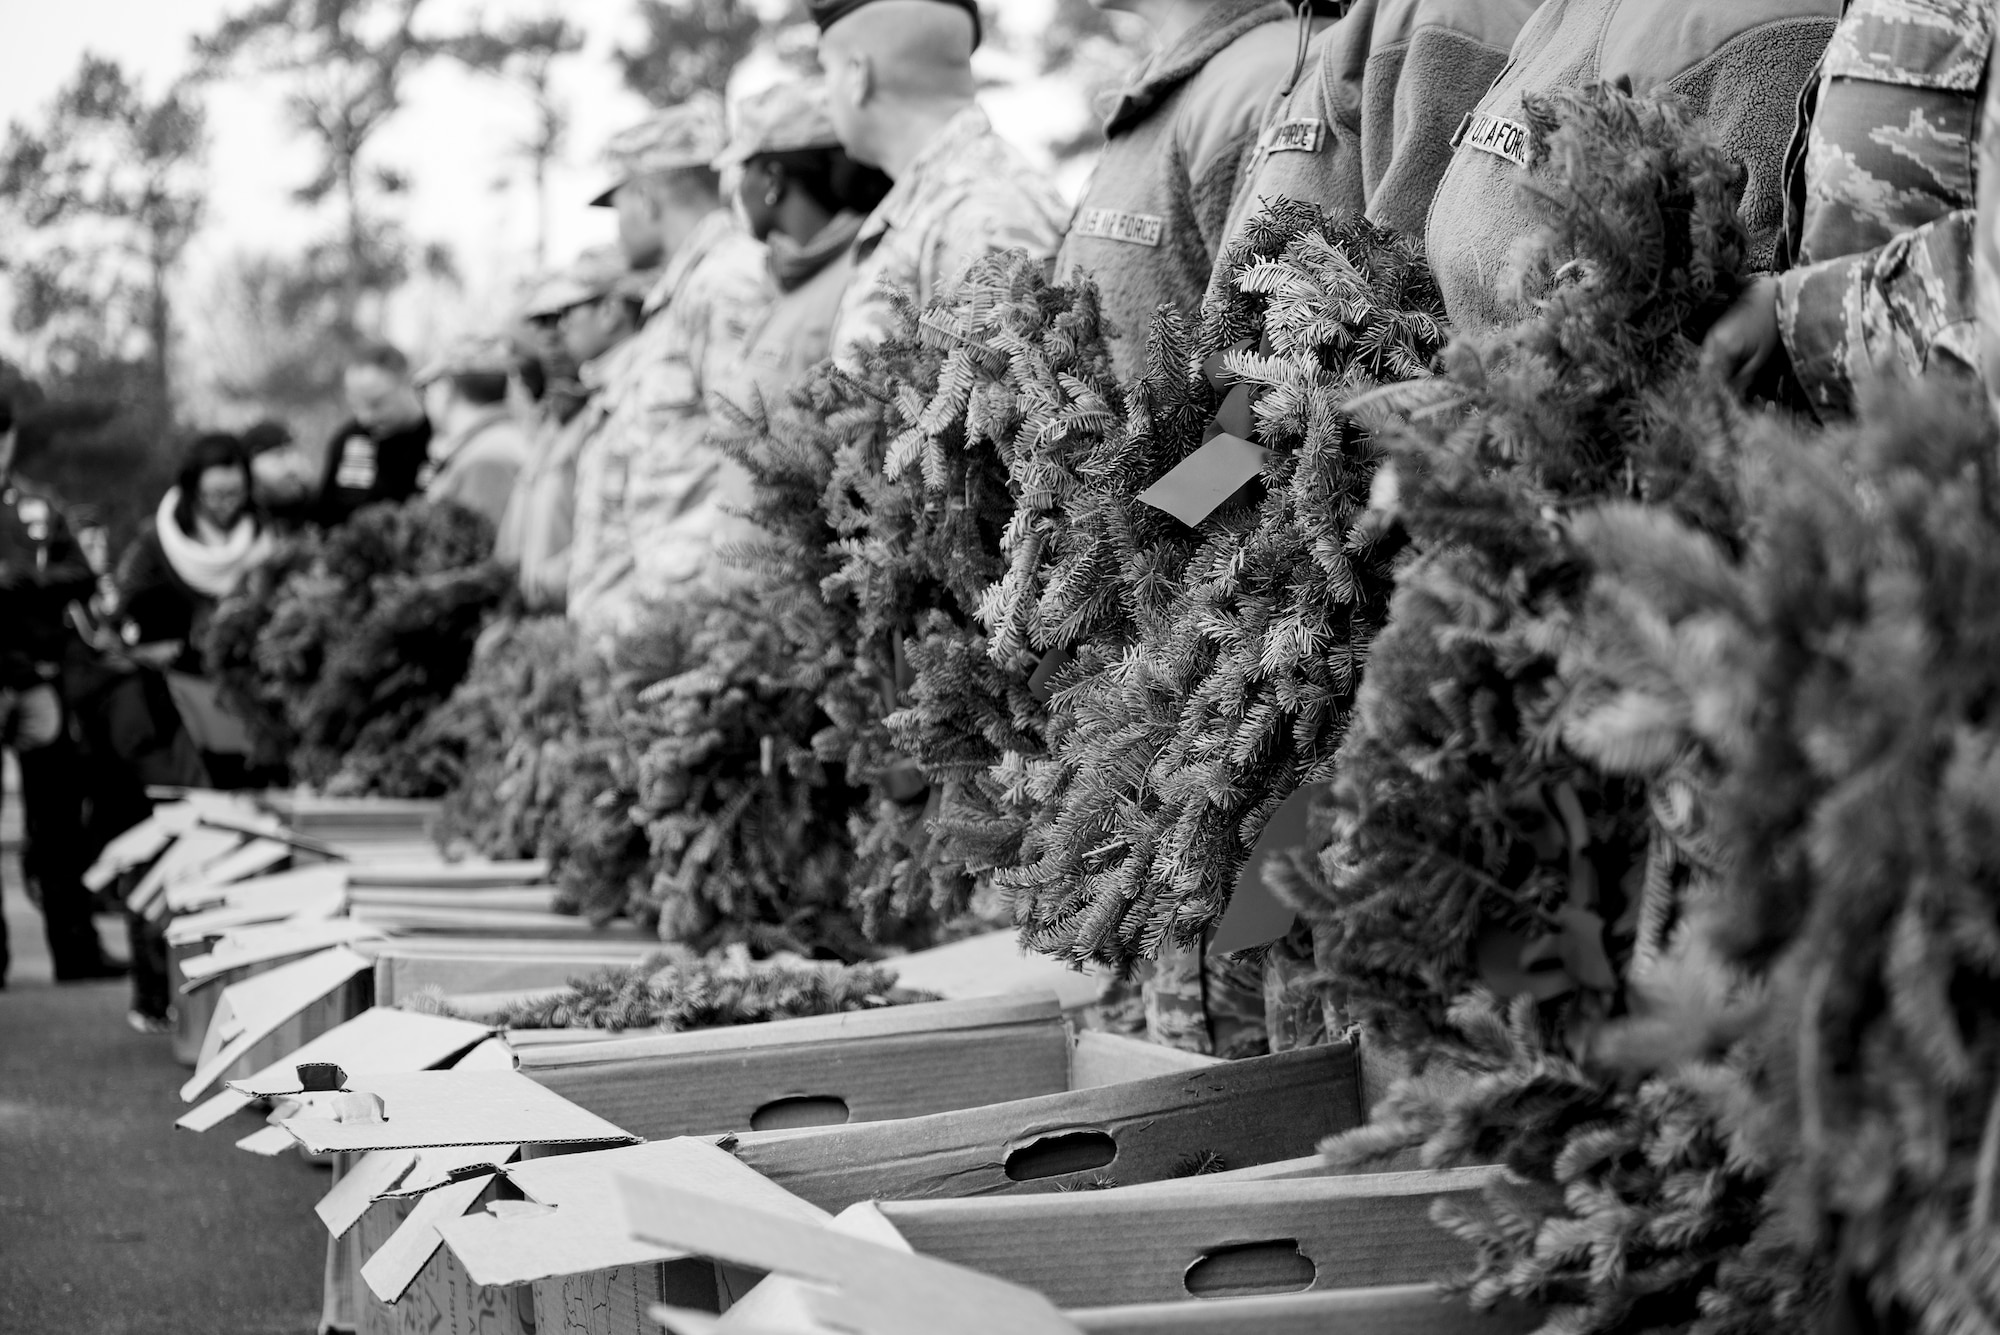 Airmen from Seymour Johnson Air Force Base, North Carolina, pass out wreaths to volunteers during a Wreaths Across America ceremony, Dec. 17, 2016 at Evergreen Memorial Cemetery, in Princeton, North Carolina. More than 50 base volunteers laid 500 wreaths on gravesites throughout the cemetery to pay tribute to fallen service members. (U.S. Air Force photo by Airman Shawna L. Keyes)